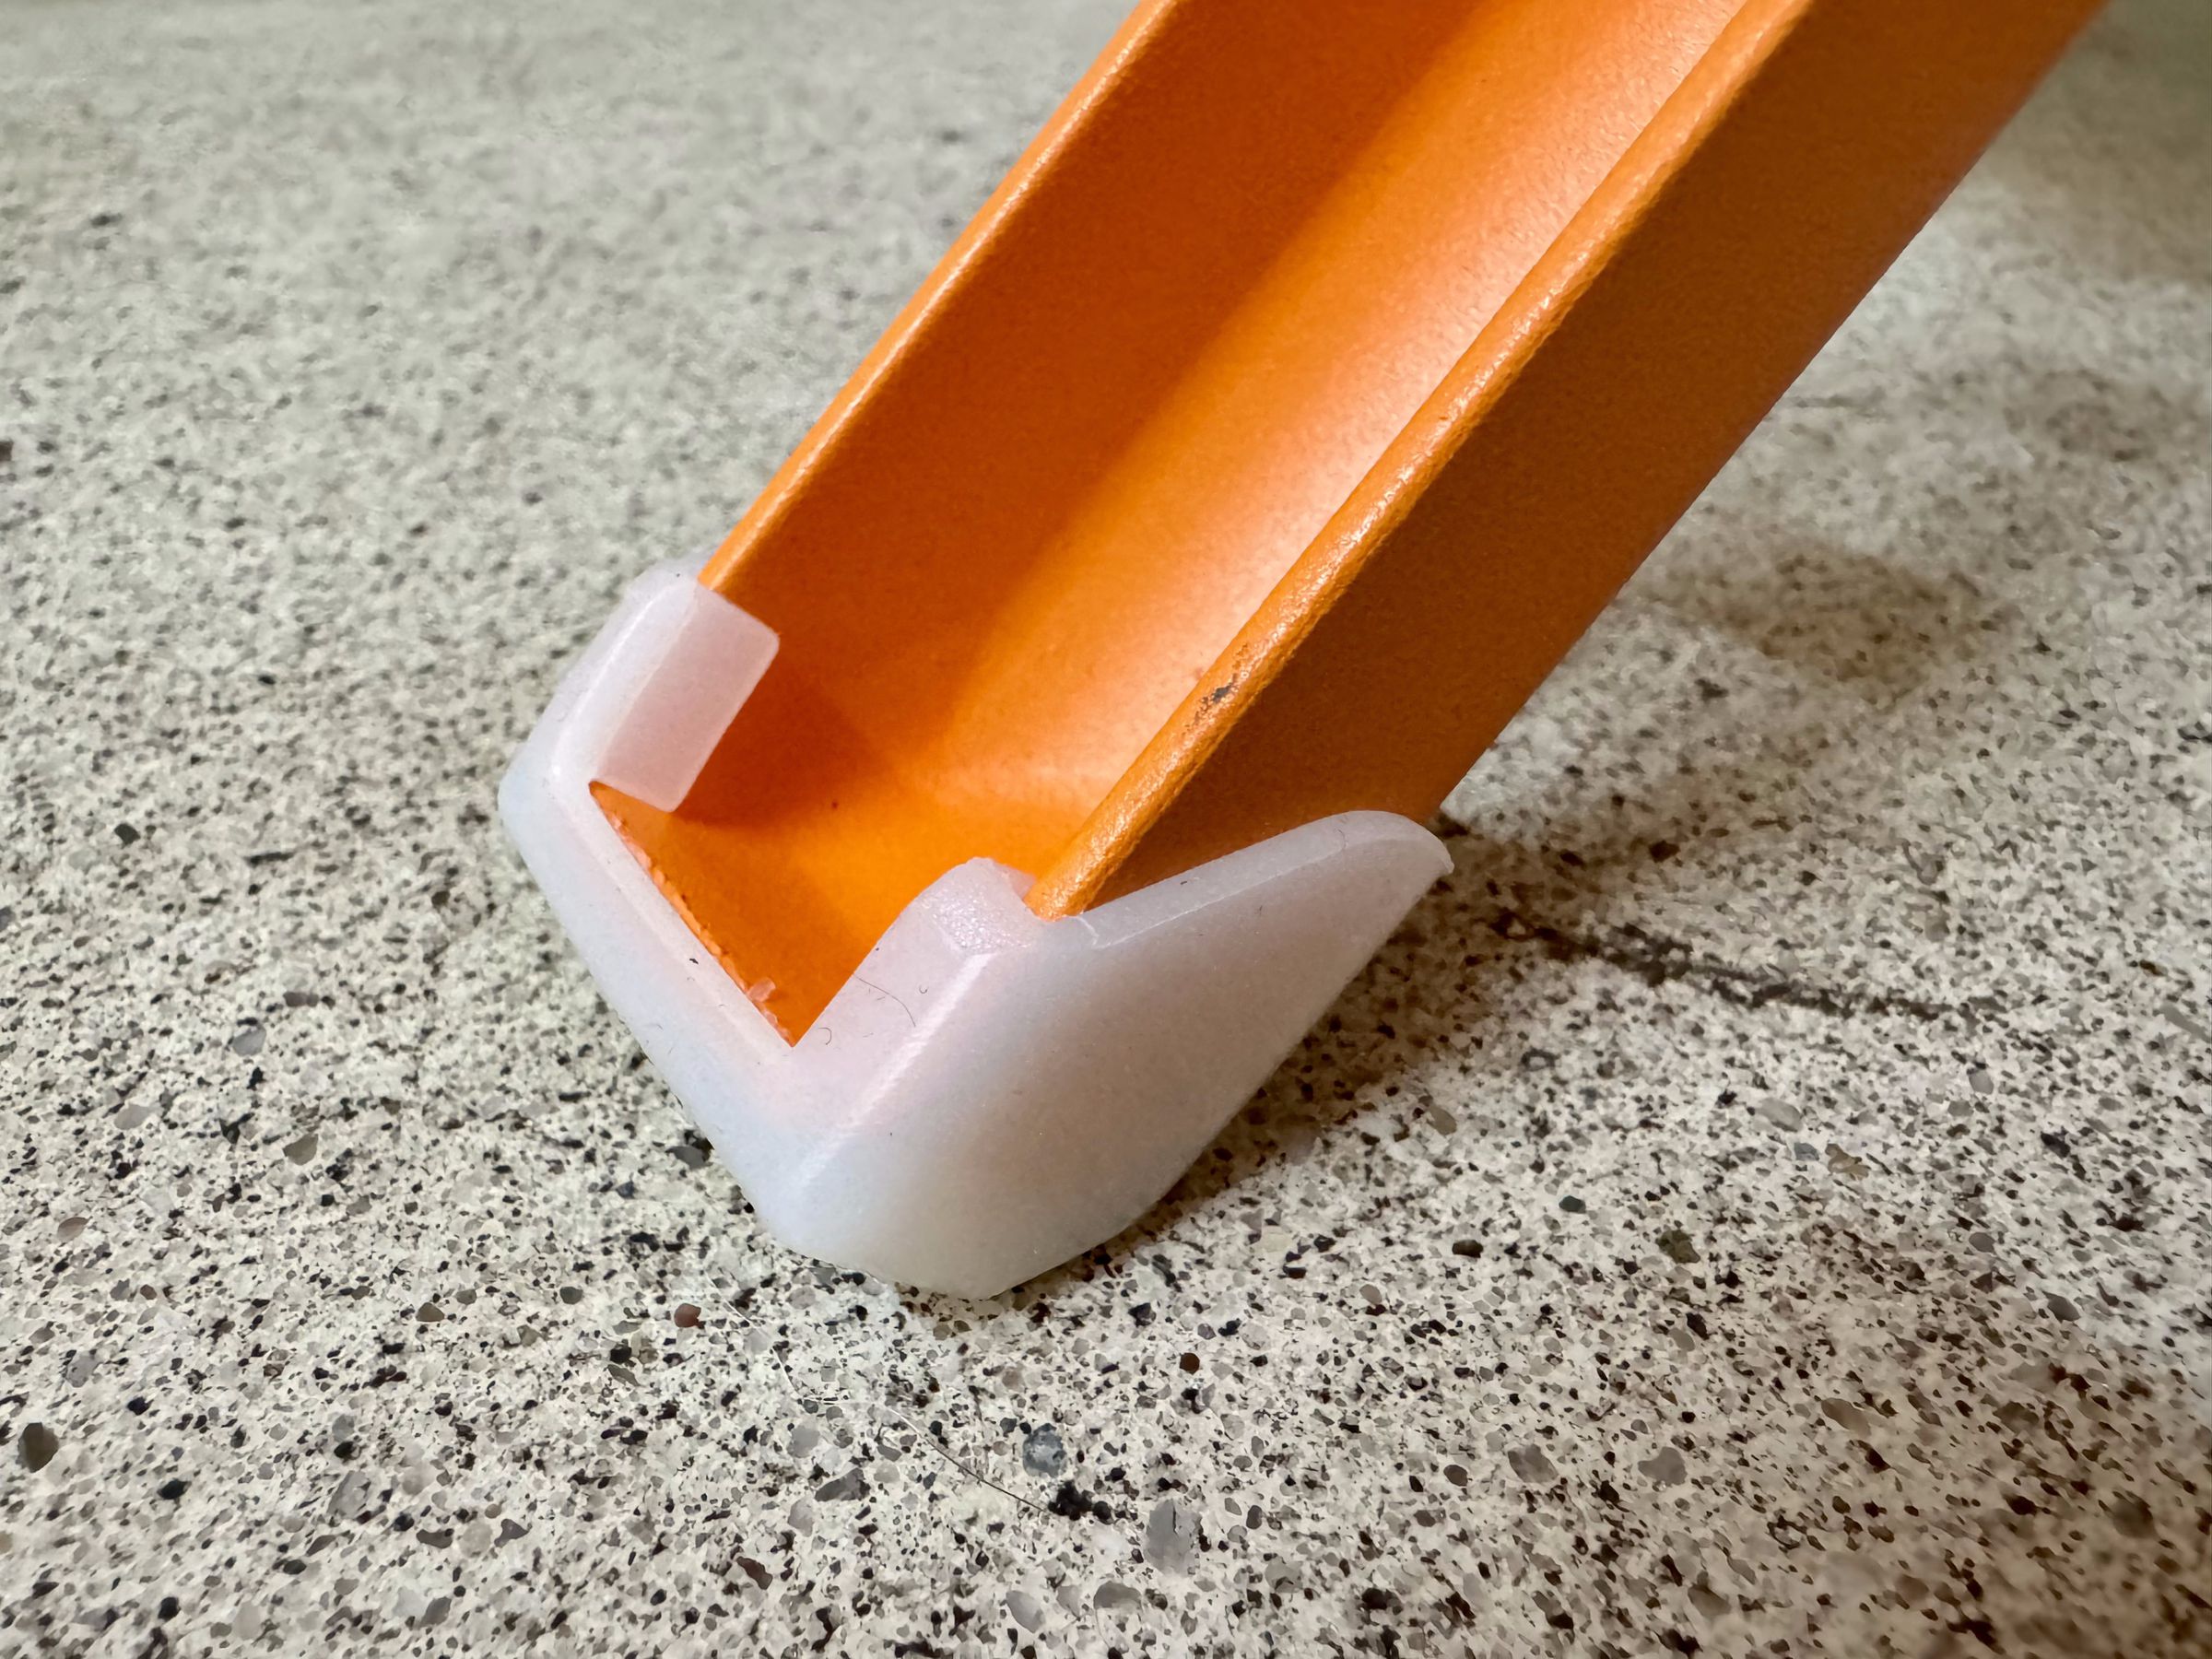 <em>Thermoplastic elastomer (TPE) feet for use on less durable surfaces. You will 100 percent lose these in time.</em>